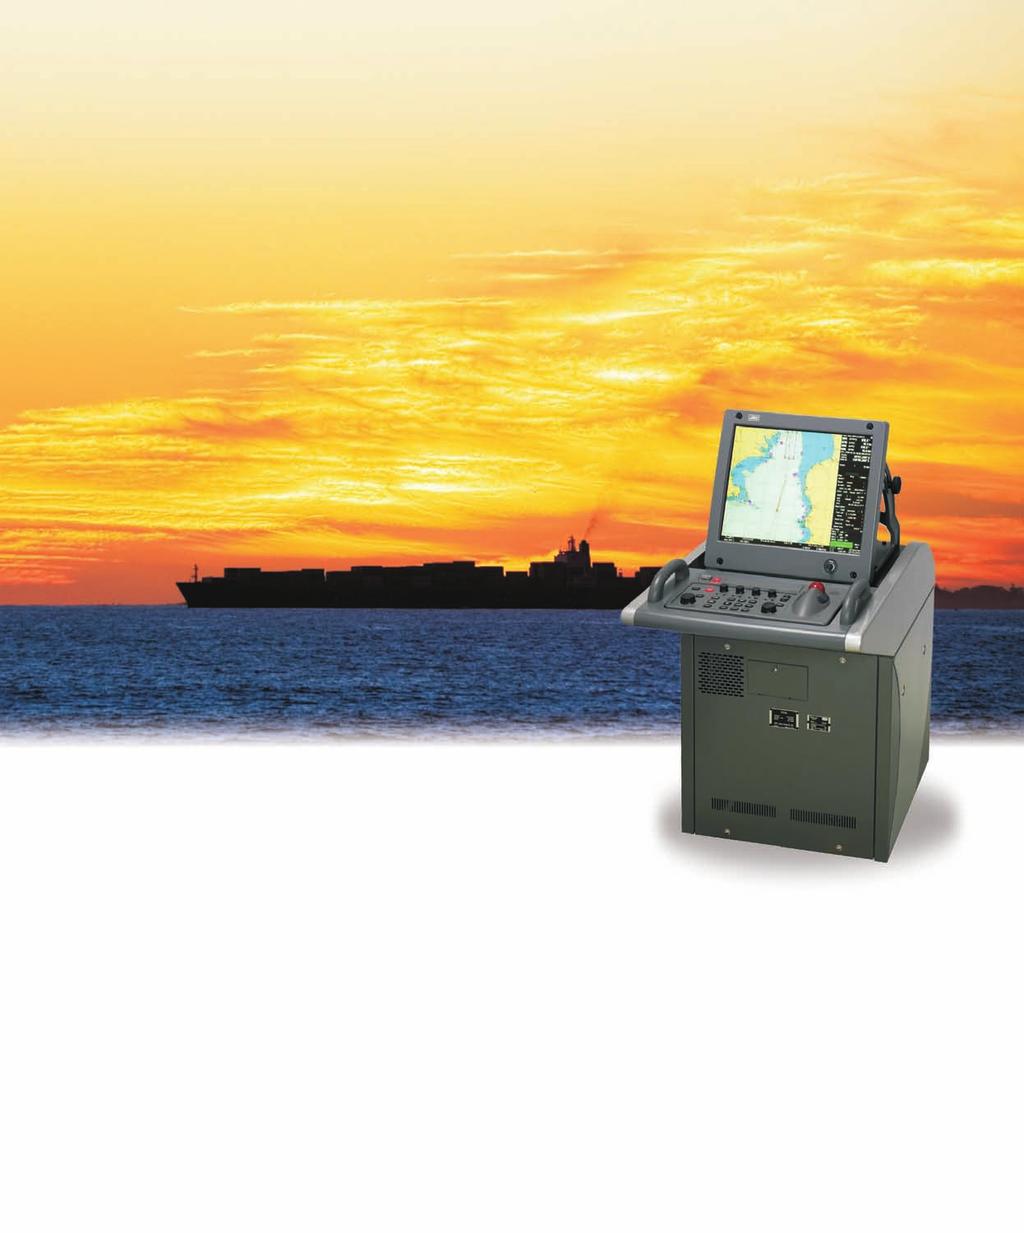 ECDIS Complies with new SOLAS regulations MSC 232(82) performance standard for ECDIS, effective from 1 January 2009.